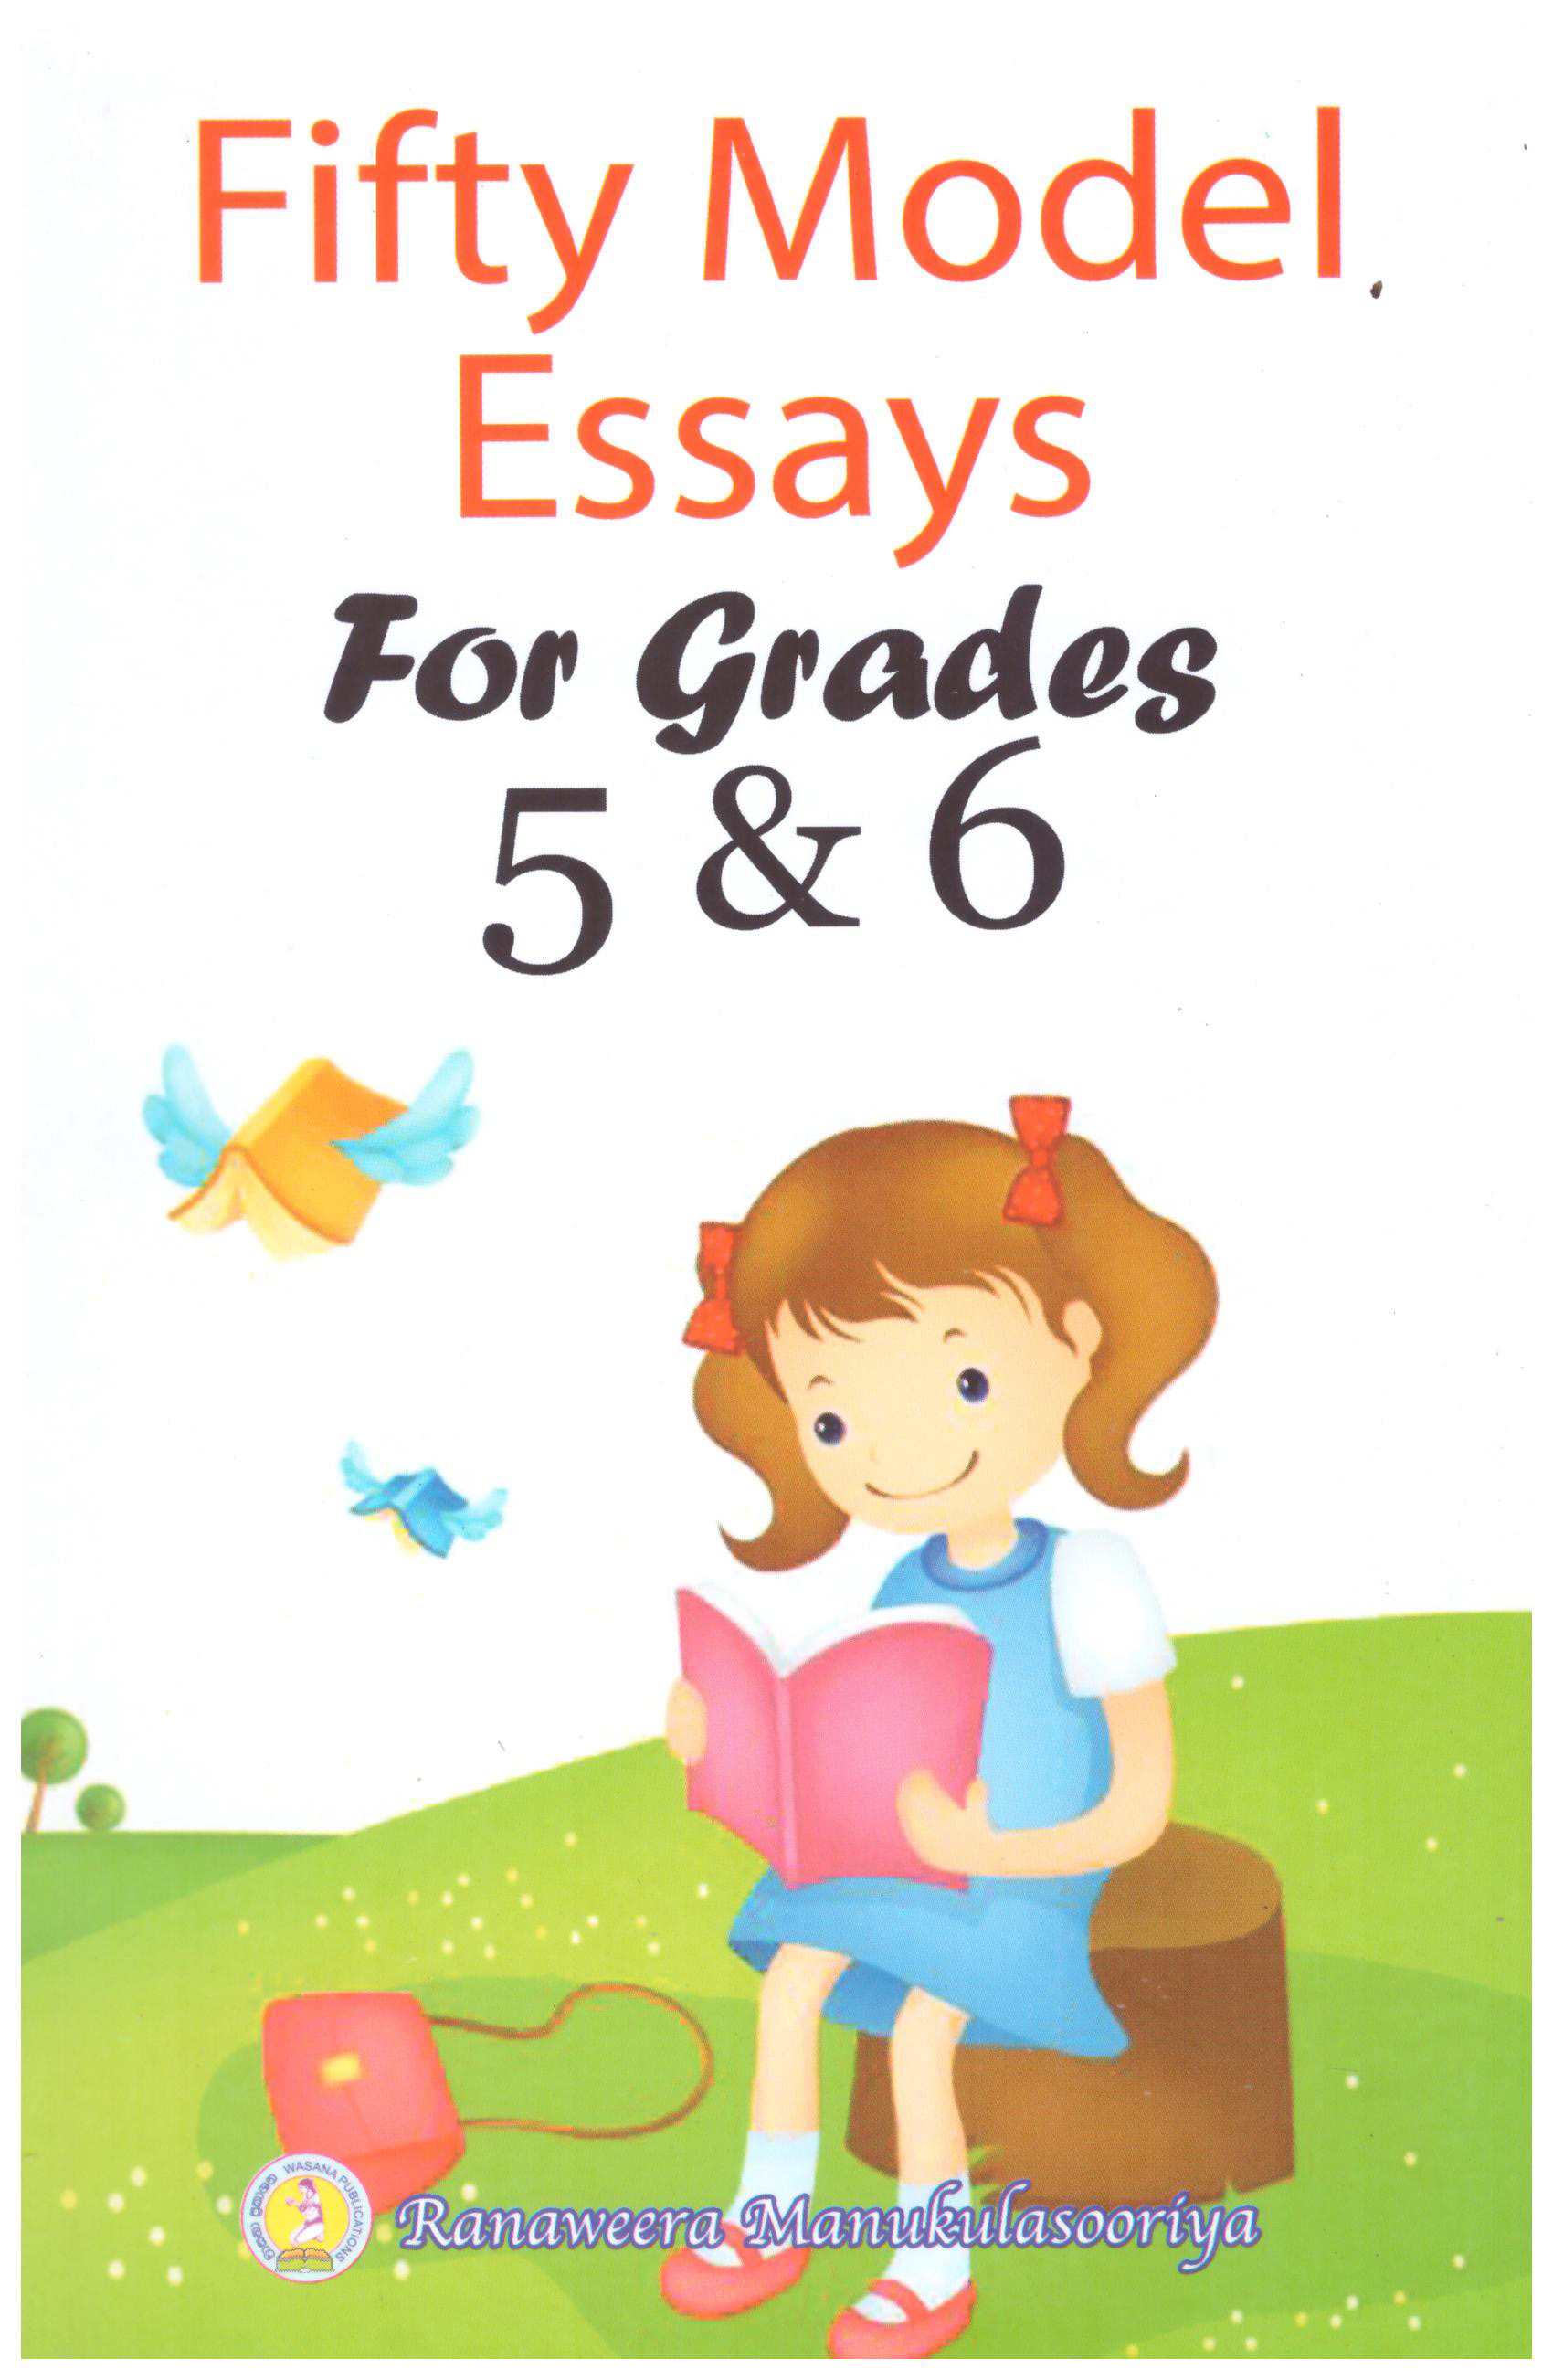 Fifty Model Essays For Grades 5&6